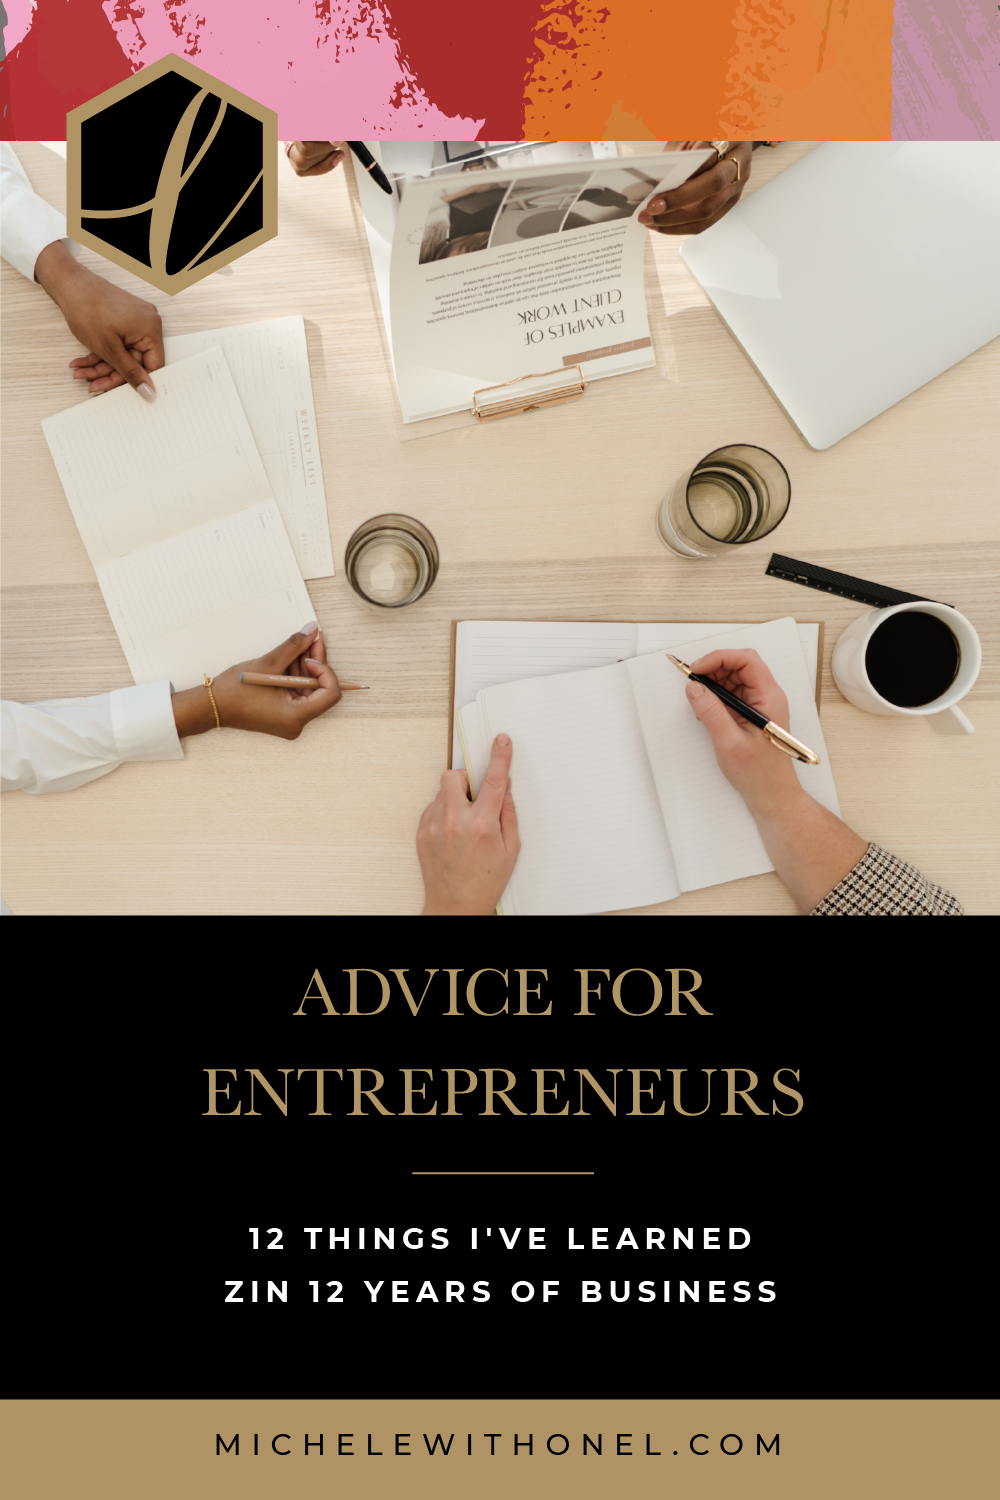 Looking for some career advice for entrepreneurs? This post is for you! You will learn my tried and true tips as a seasoned entrepreneur — including business advice, tips for small business owners, and entrepreneurship guidance. #entrepreneur #business #advice #success